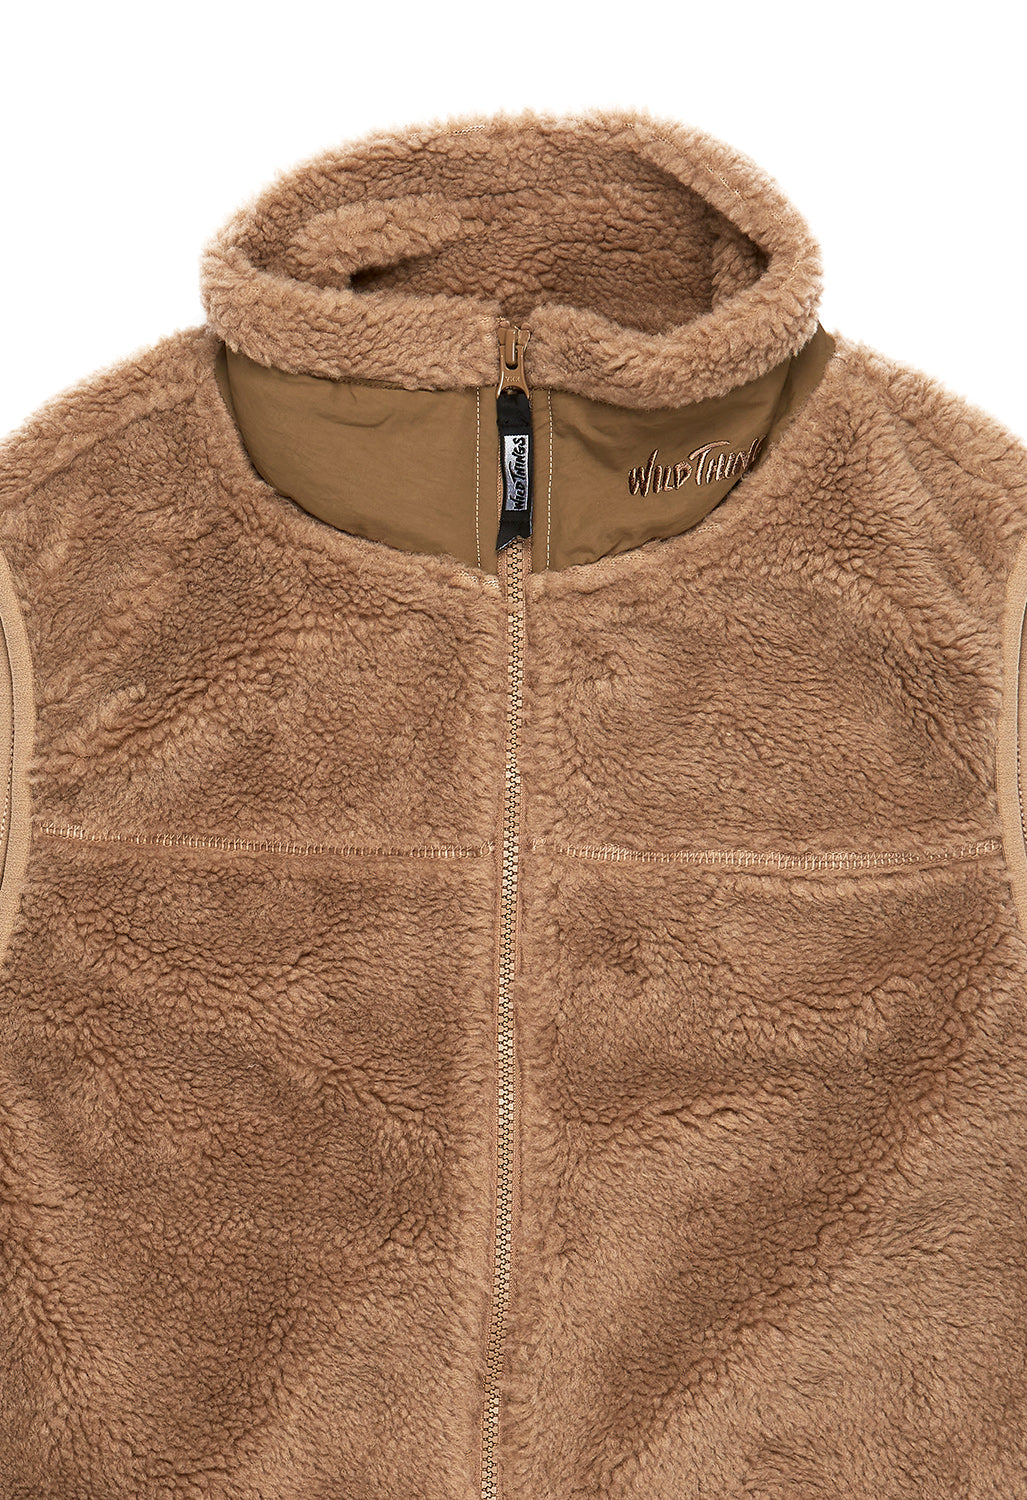 Wild Things Men's Boa Vest - Taupe